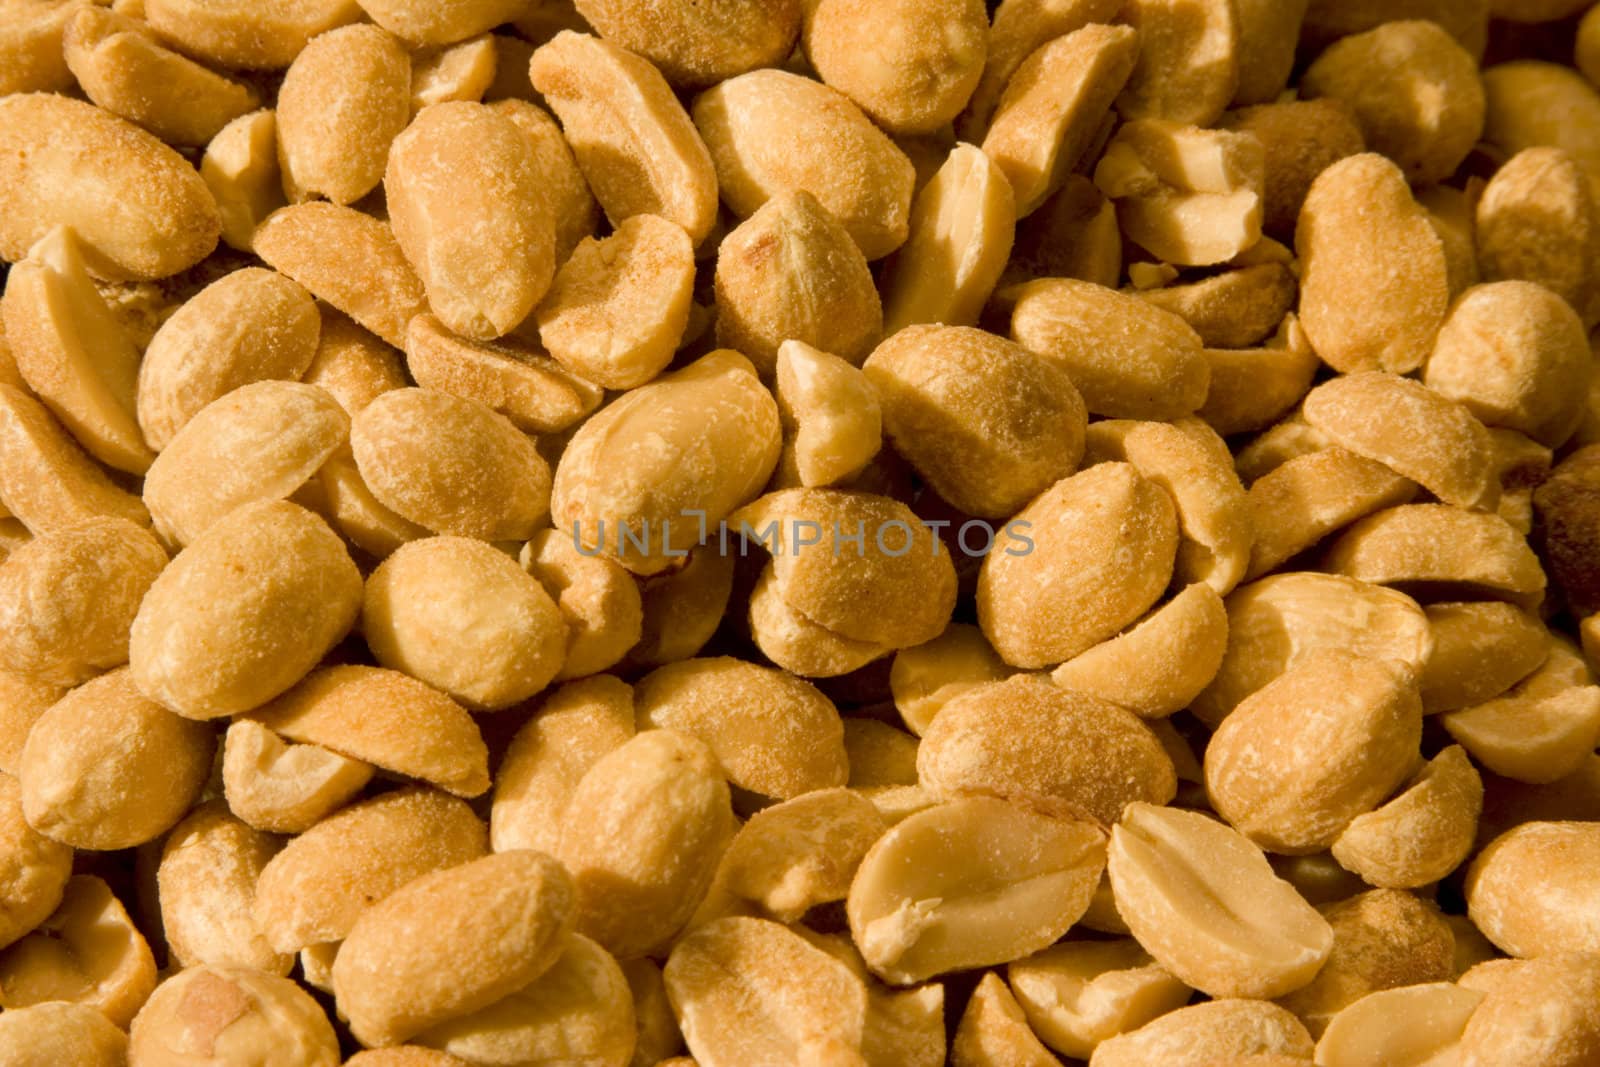 Dry Roasted peanuts close up good for a background image